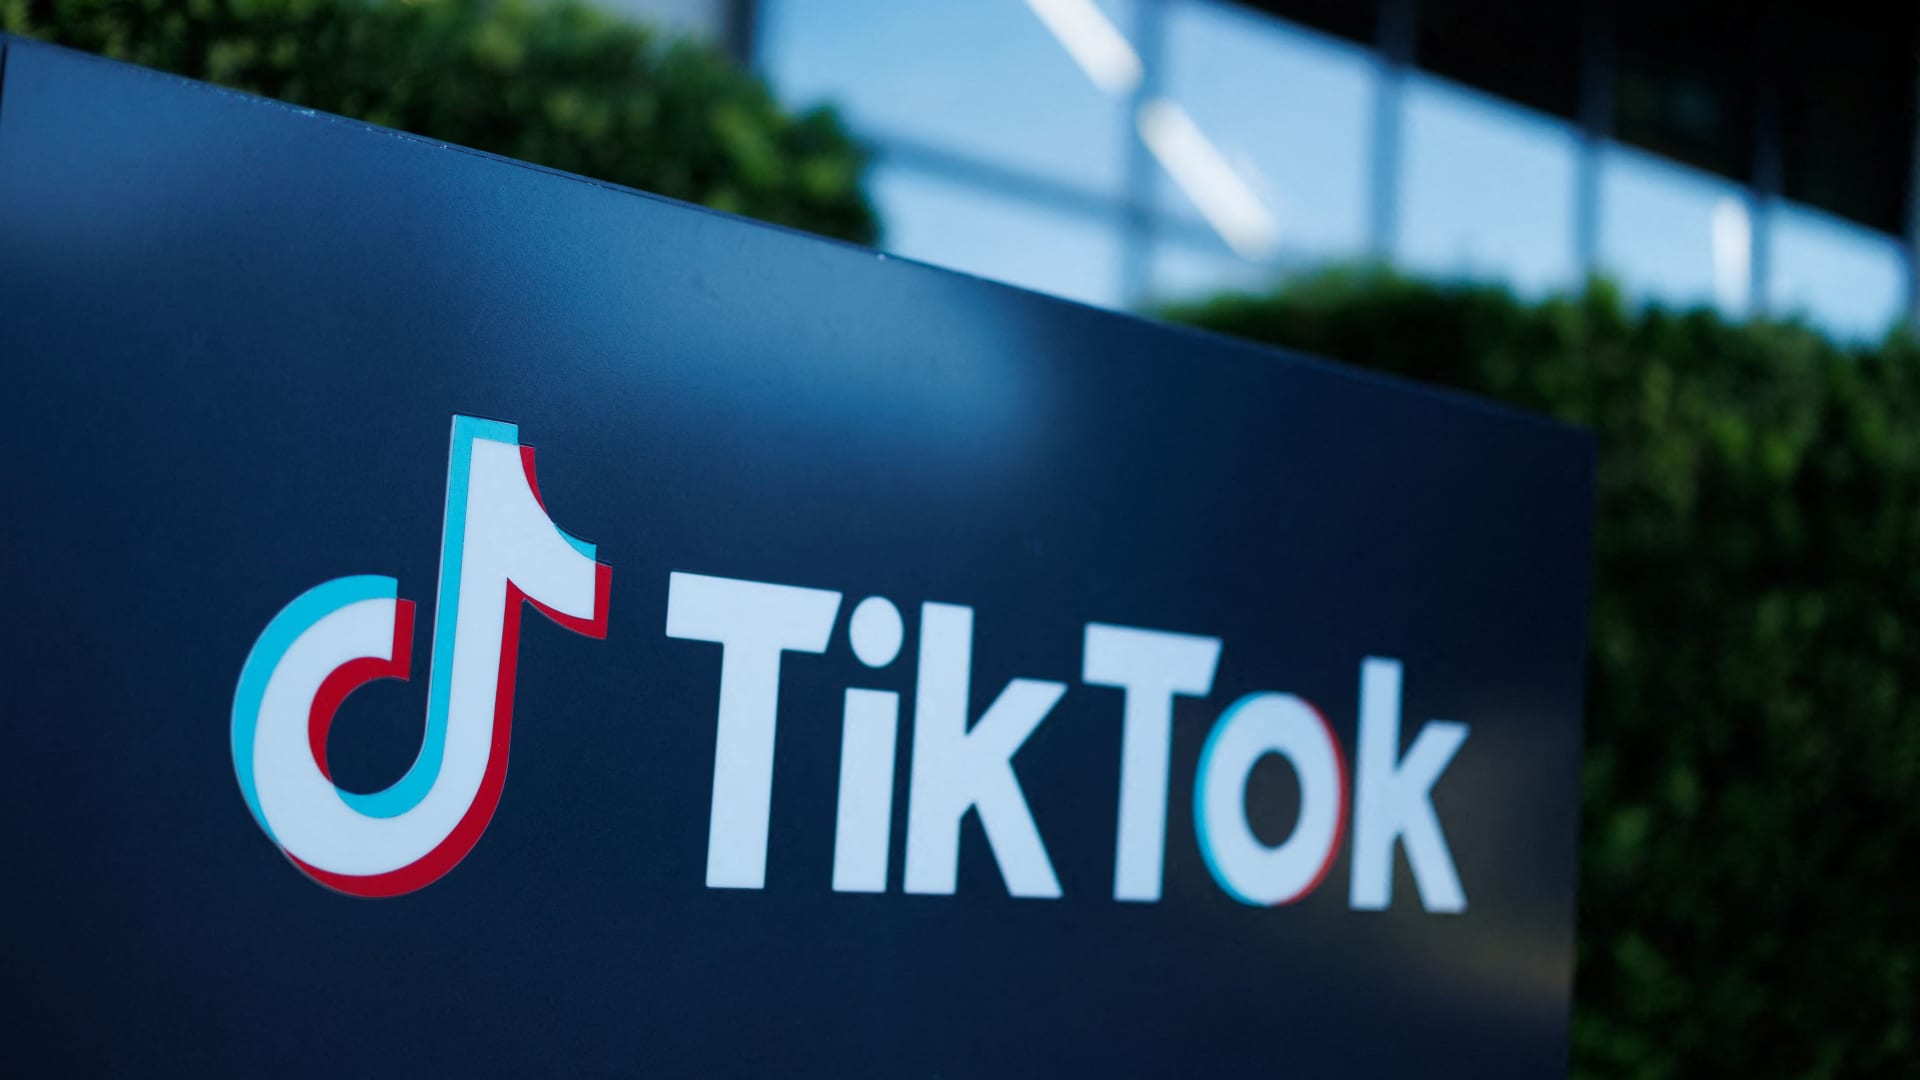 Kevin O'Leary on why he wants to buy TikTok